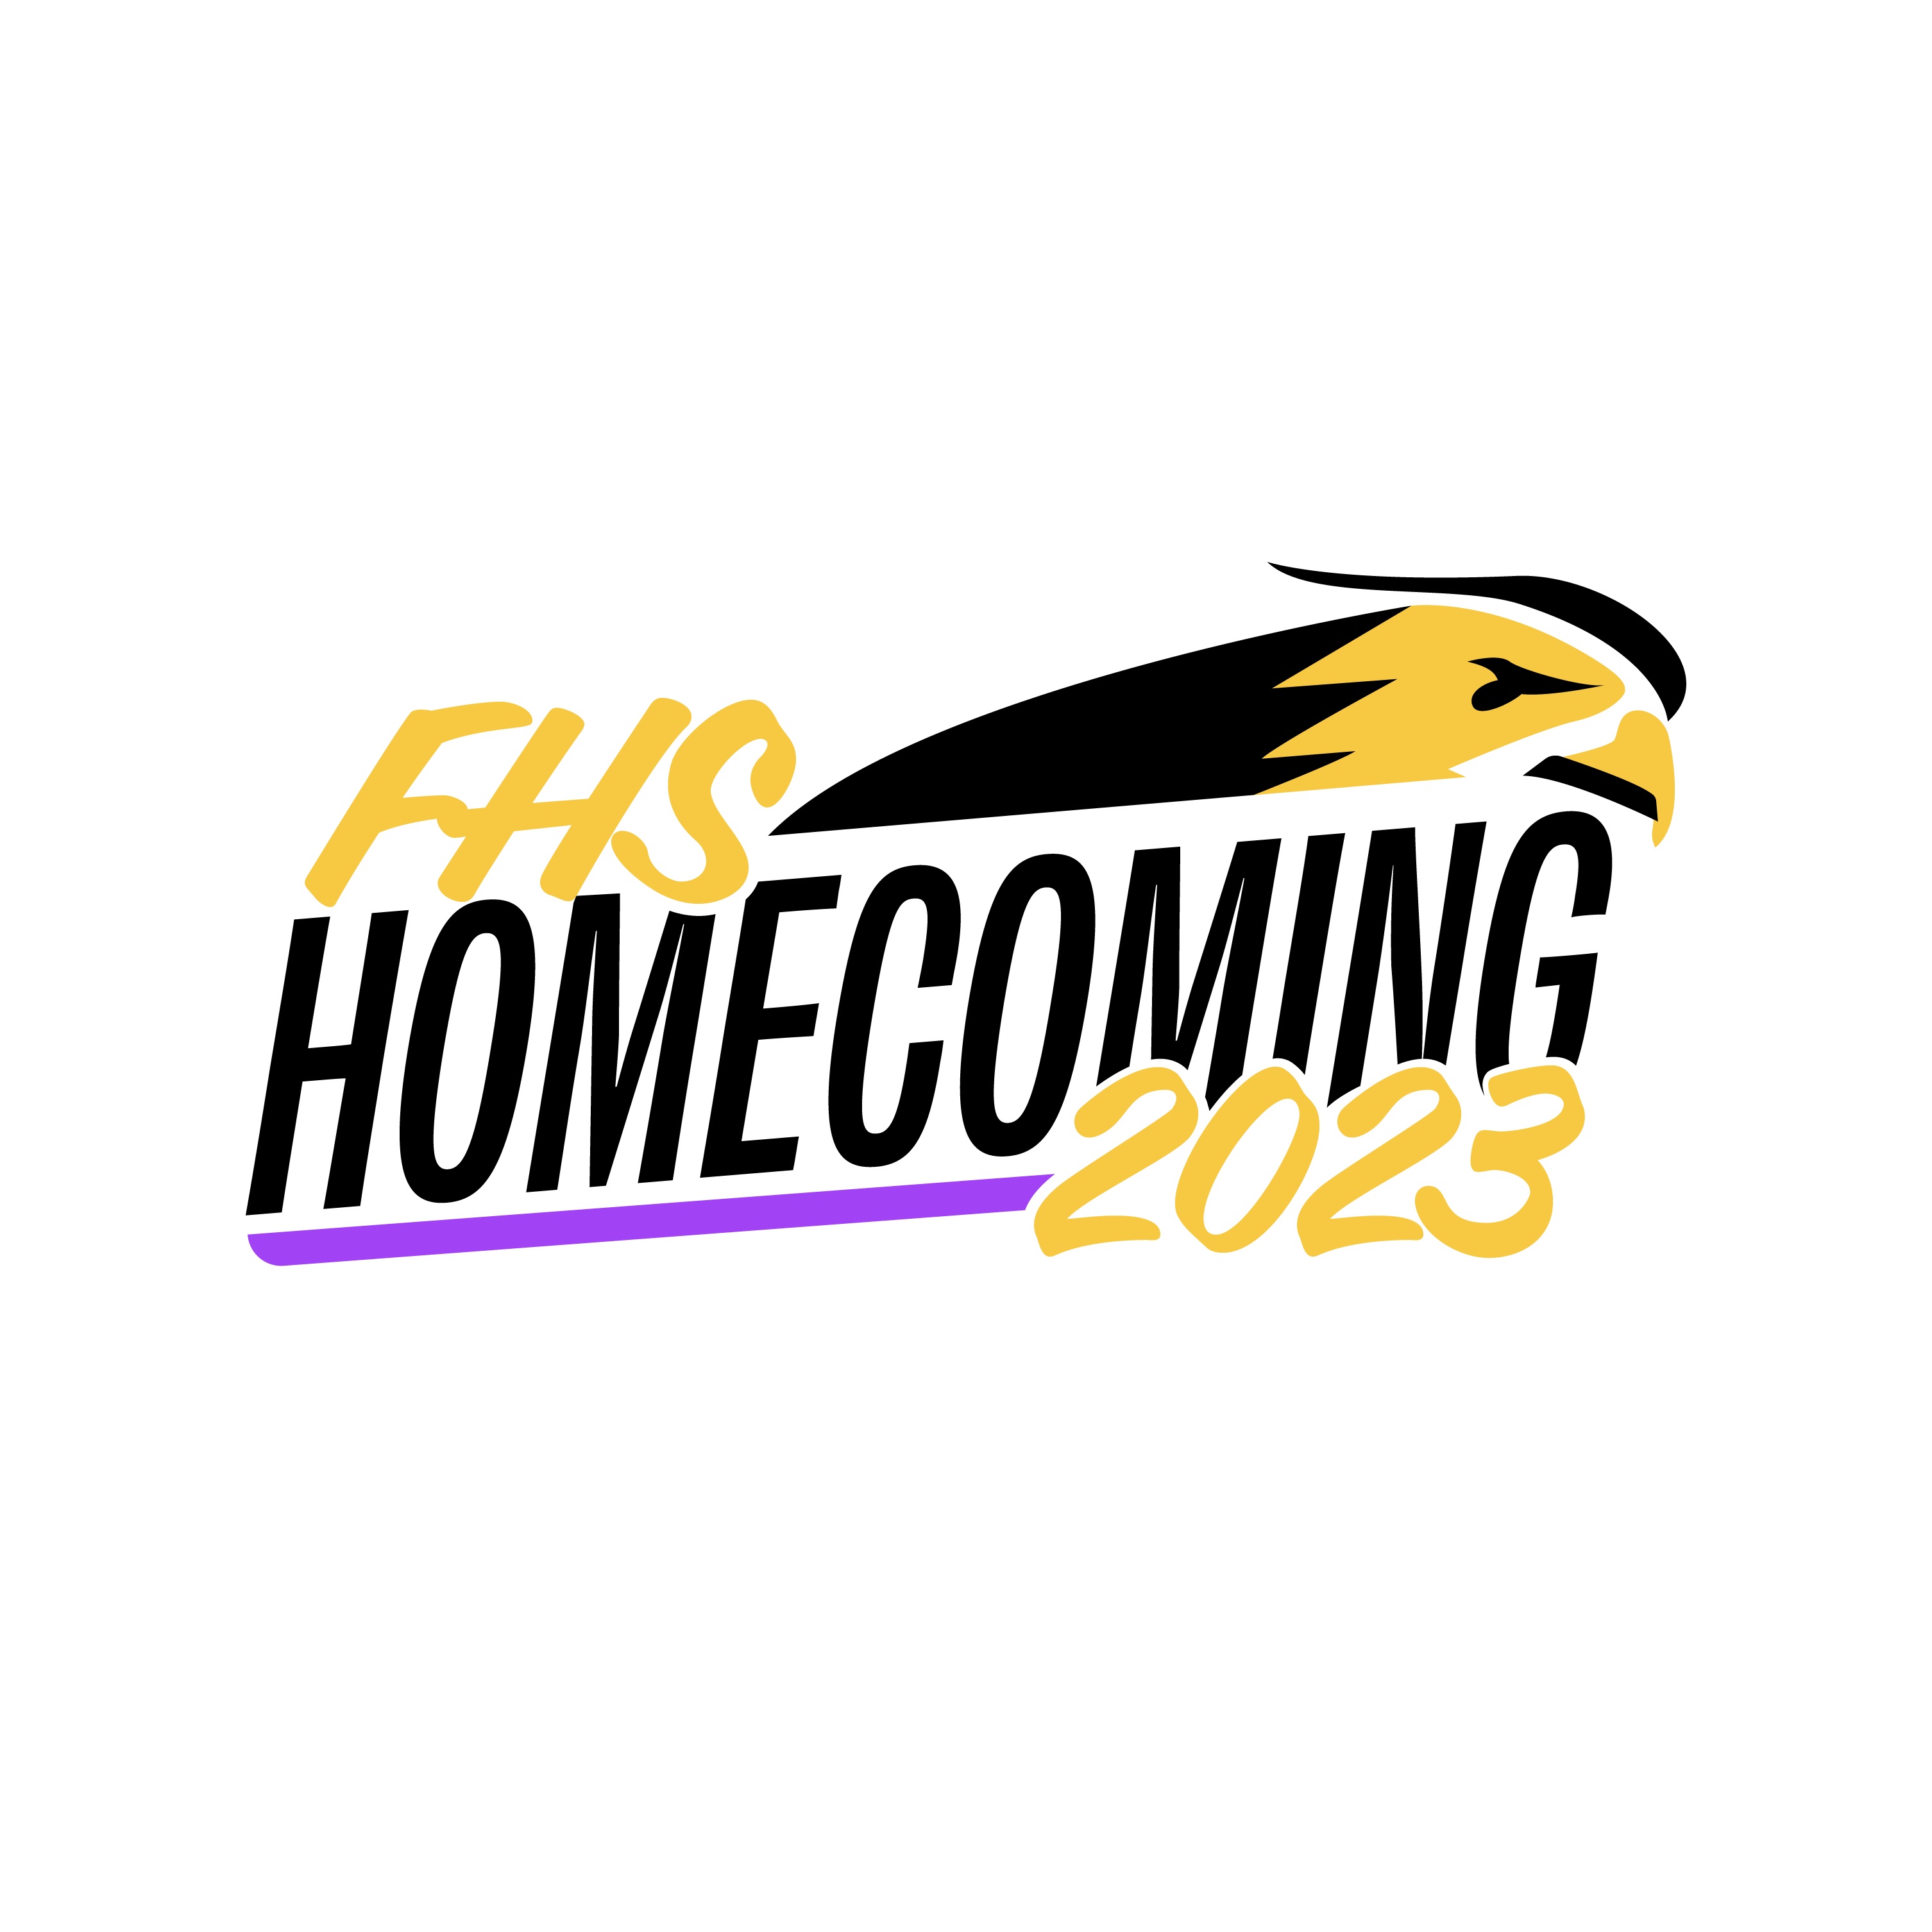 Click here for all the 2023 FHS Homecoming information you need